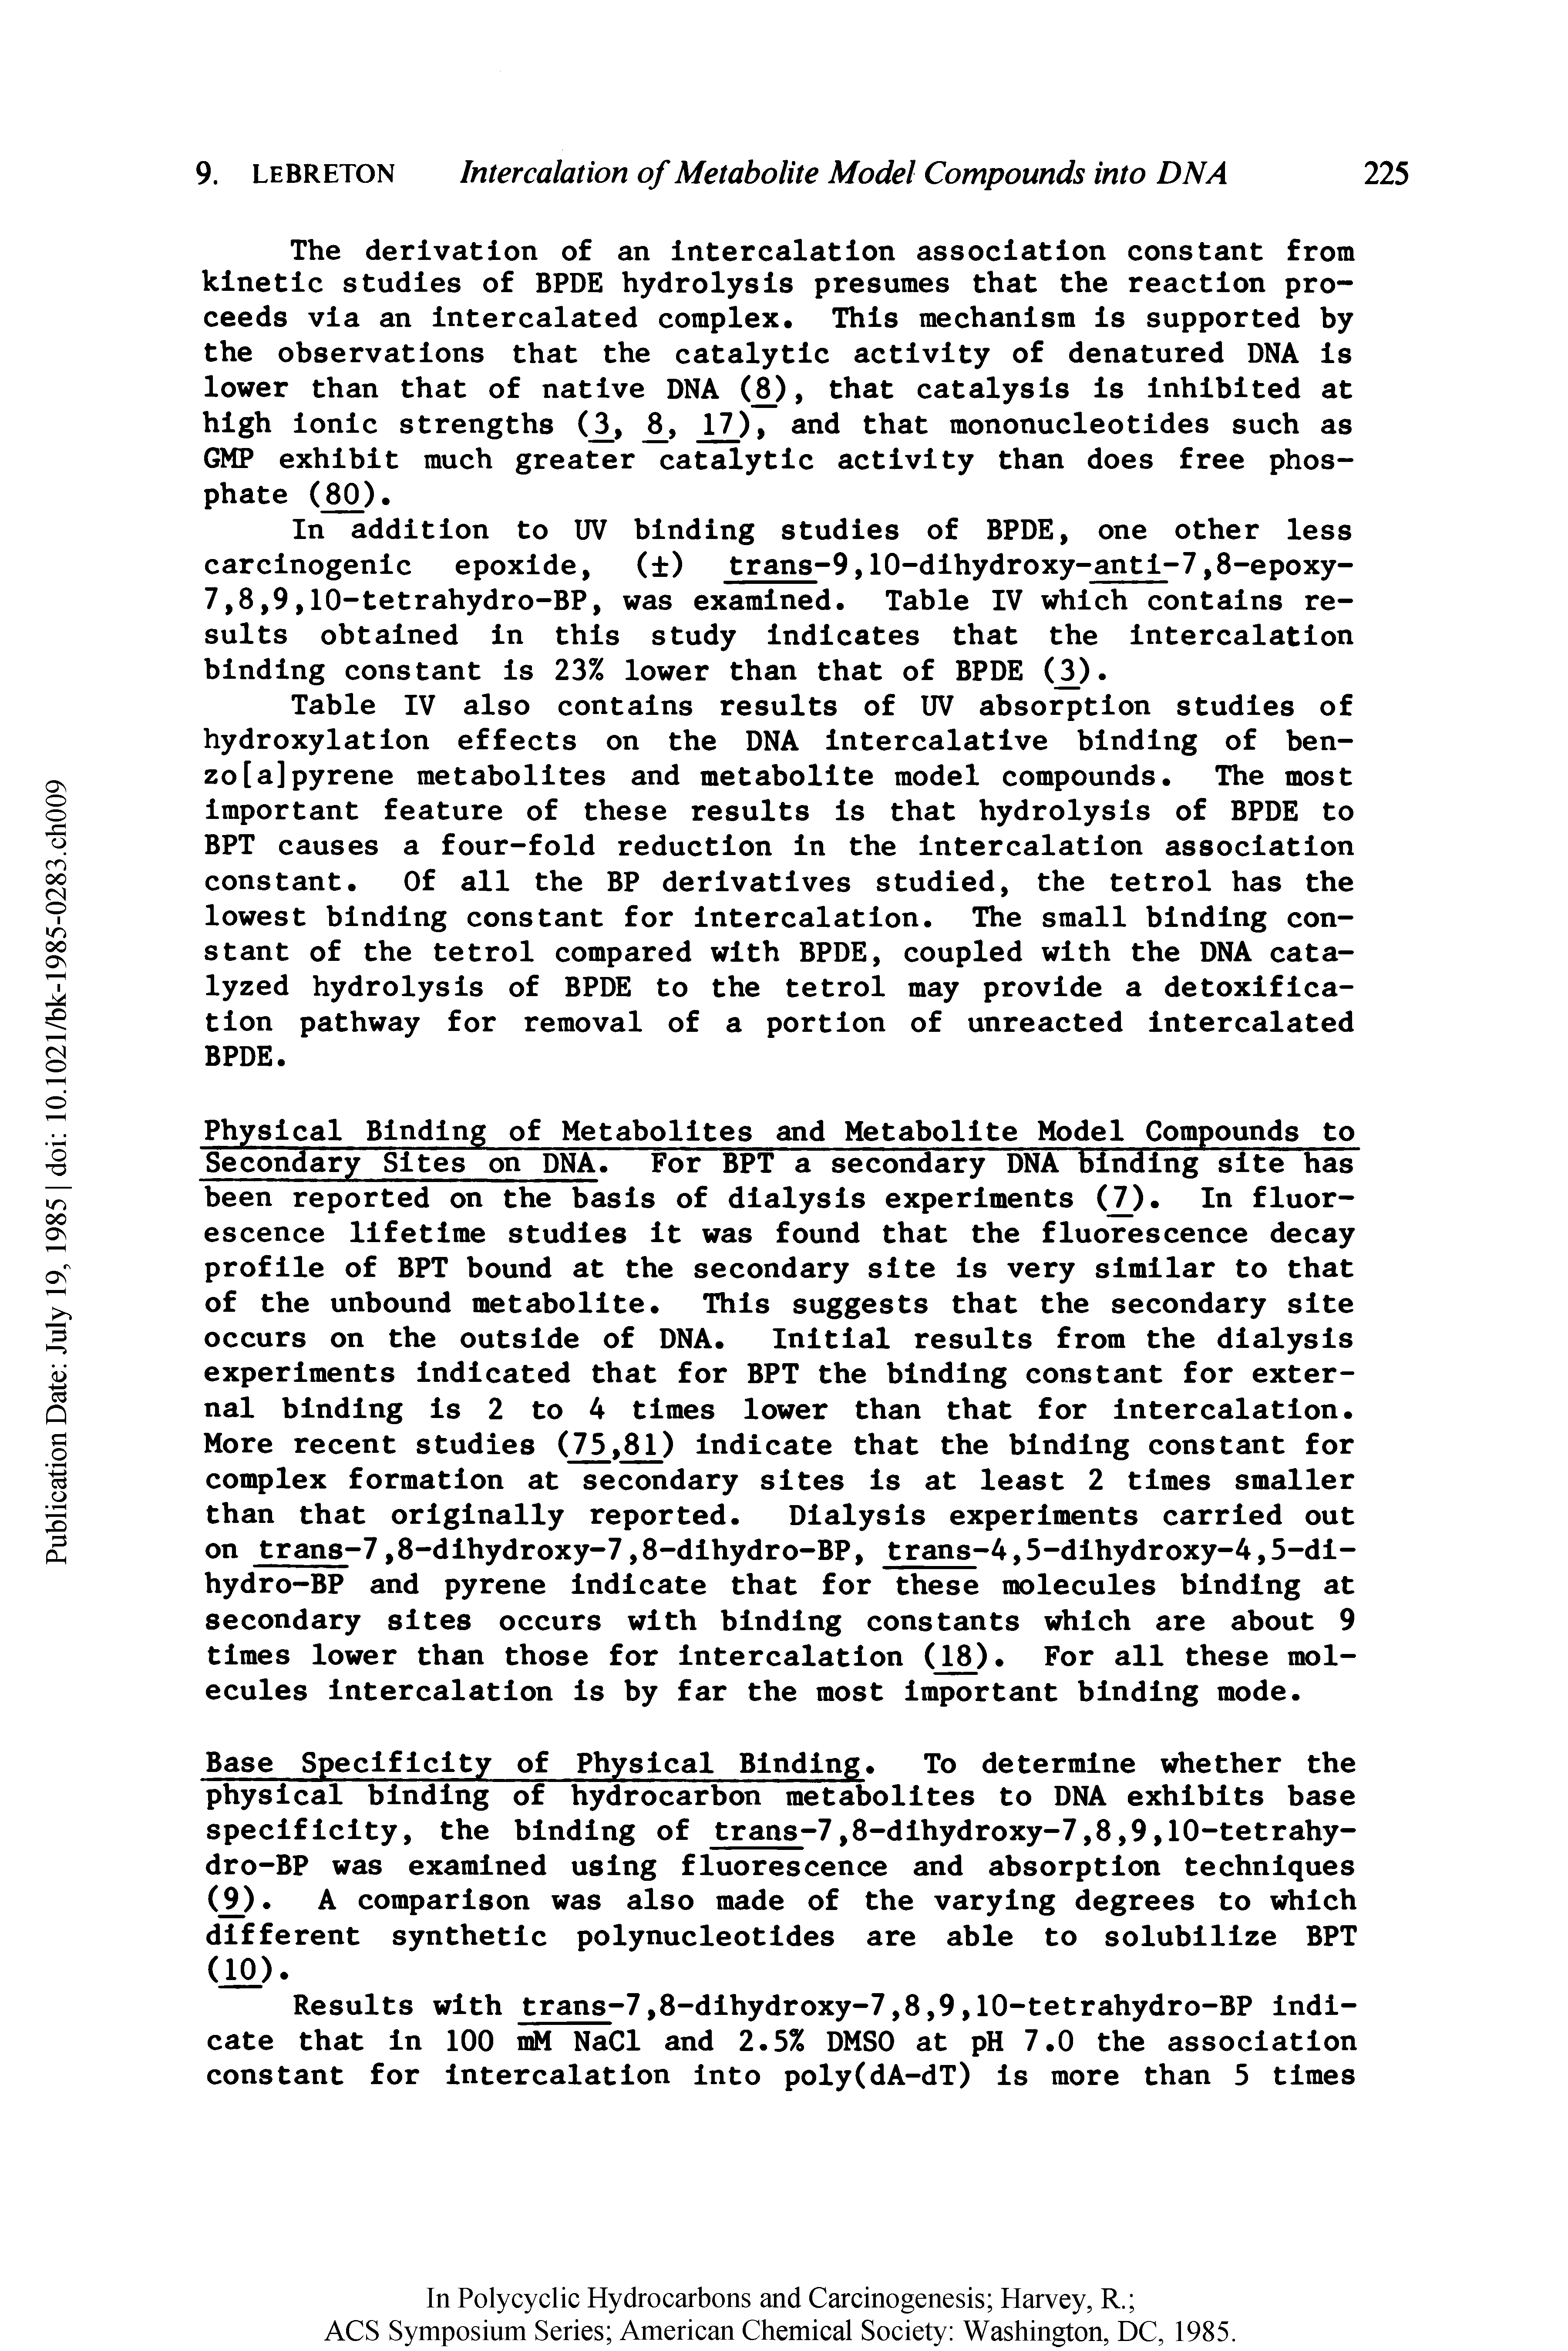 Table IV also contains results of UV absorption studies of hydroxylation effects on the DNA intercalative binding of ben-zo[a]pyrene metabolites and metabolite model compounds. The most important feature of these results is that hydrolysis of BPDE to BPT causes a four-fold reduction in the intercalation association constant. Of all the BP derivatives studied, the tetrol has the lowest binding constant for intercalation. The small binding constant of the tetrol compared with BPDE, coupled with the DNA catalyzed hydrolysis of BPDE to the tetrol may provide a detoxification pathway for removal of a portion of unreacted intercalated BPDE.